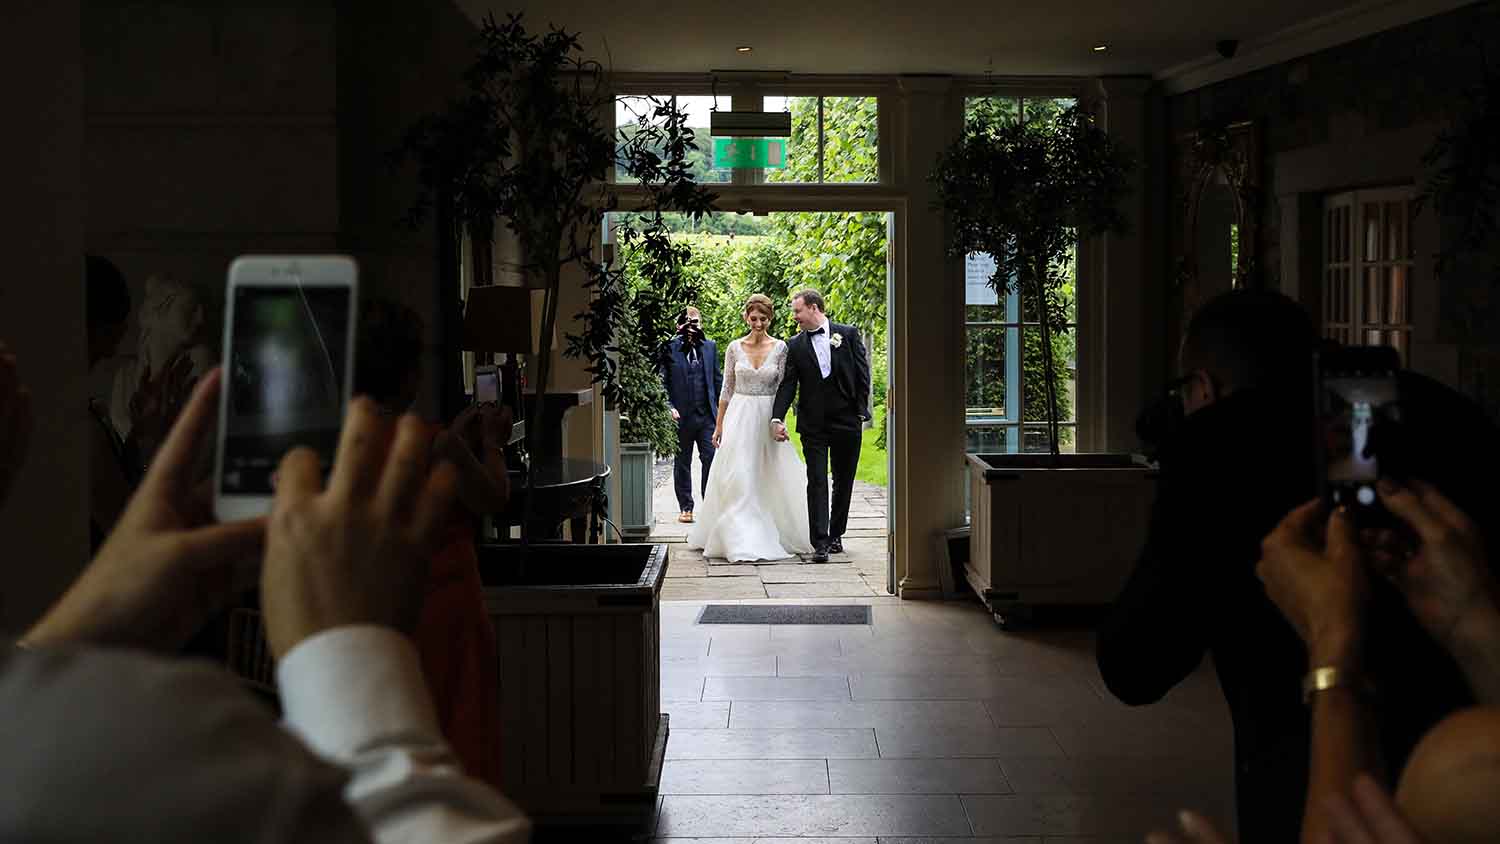 Couple entering the reception room on their wedding day